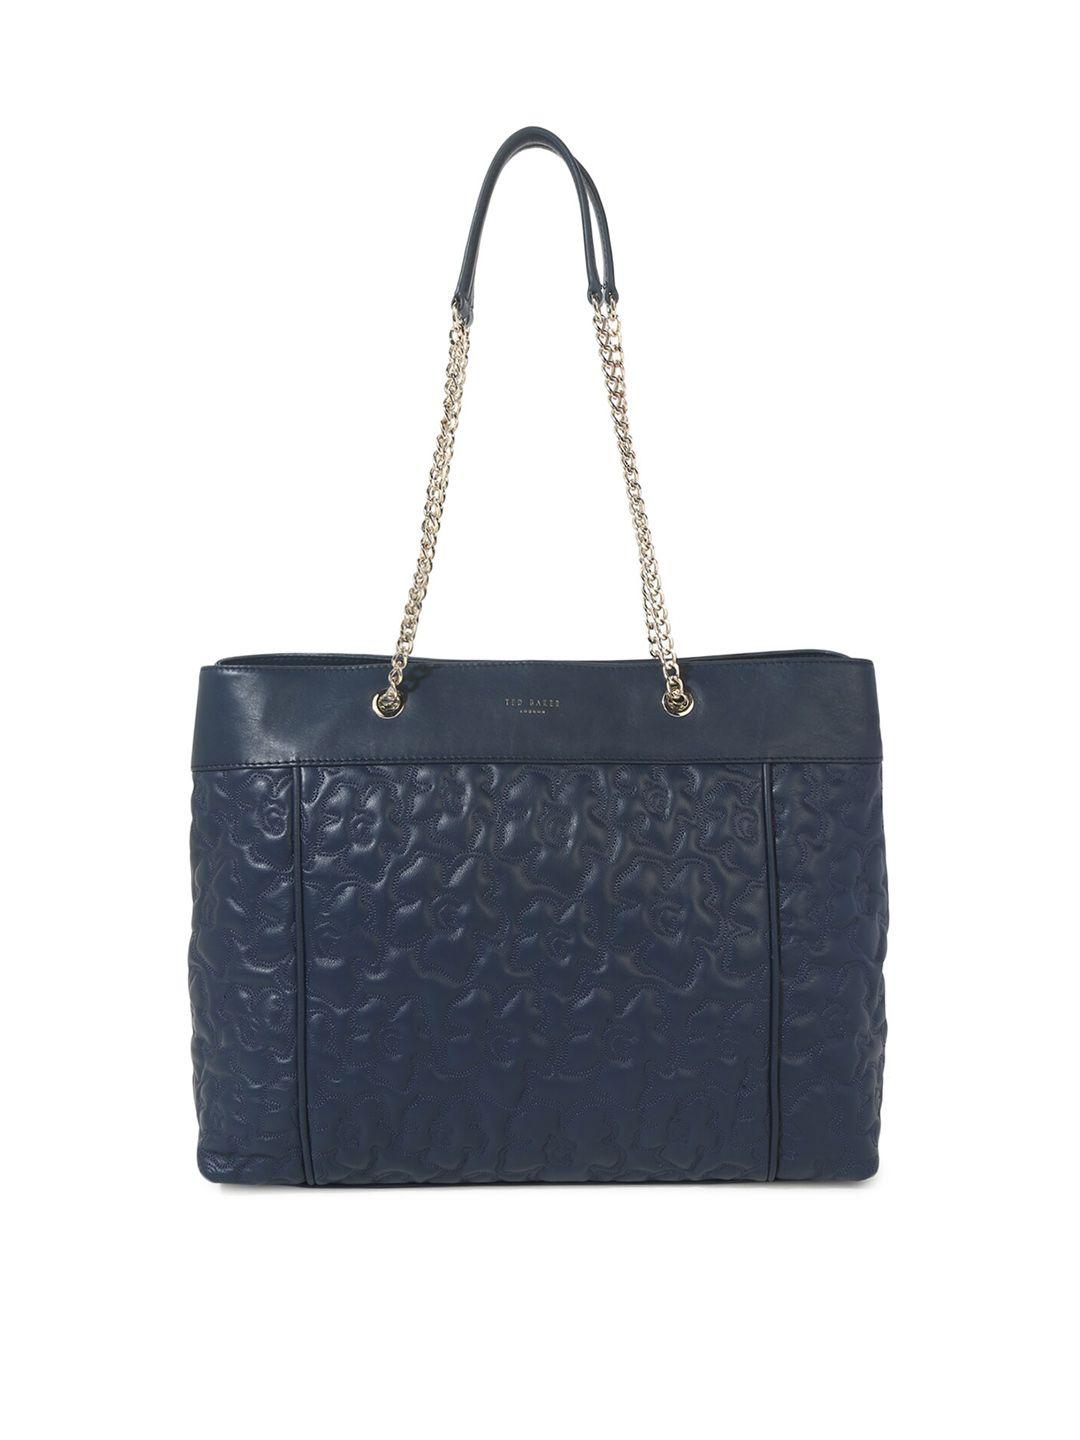 ted baker navy blue floral textured leather structured shoulder bag with quilted